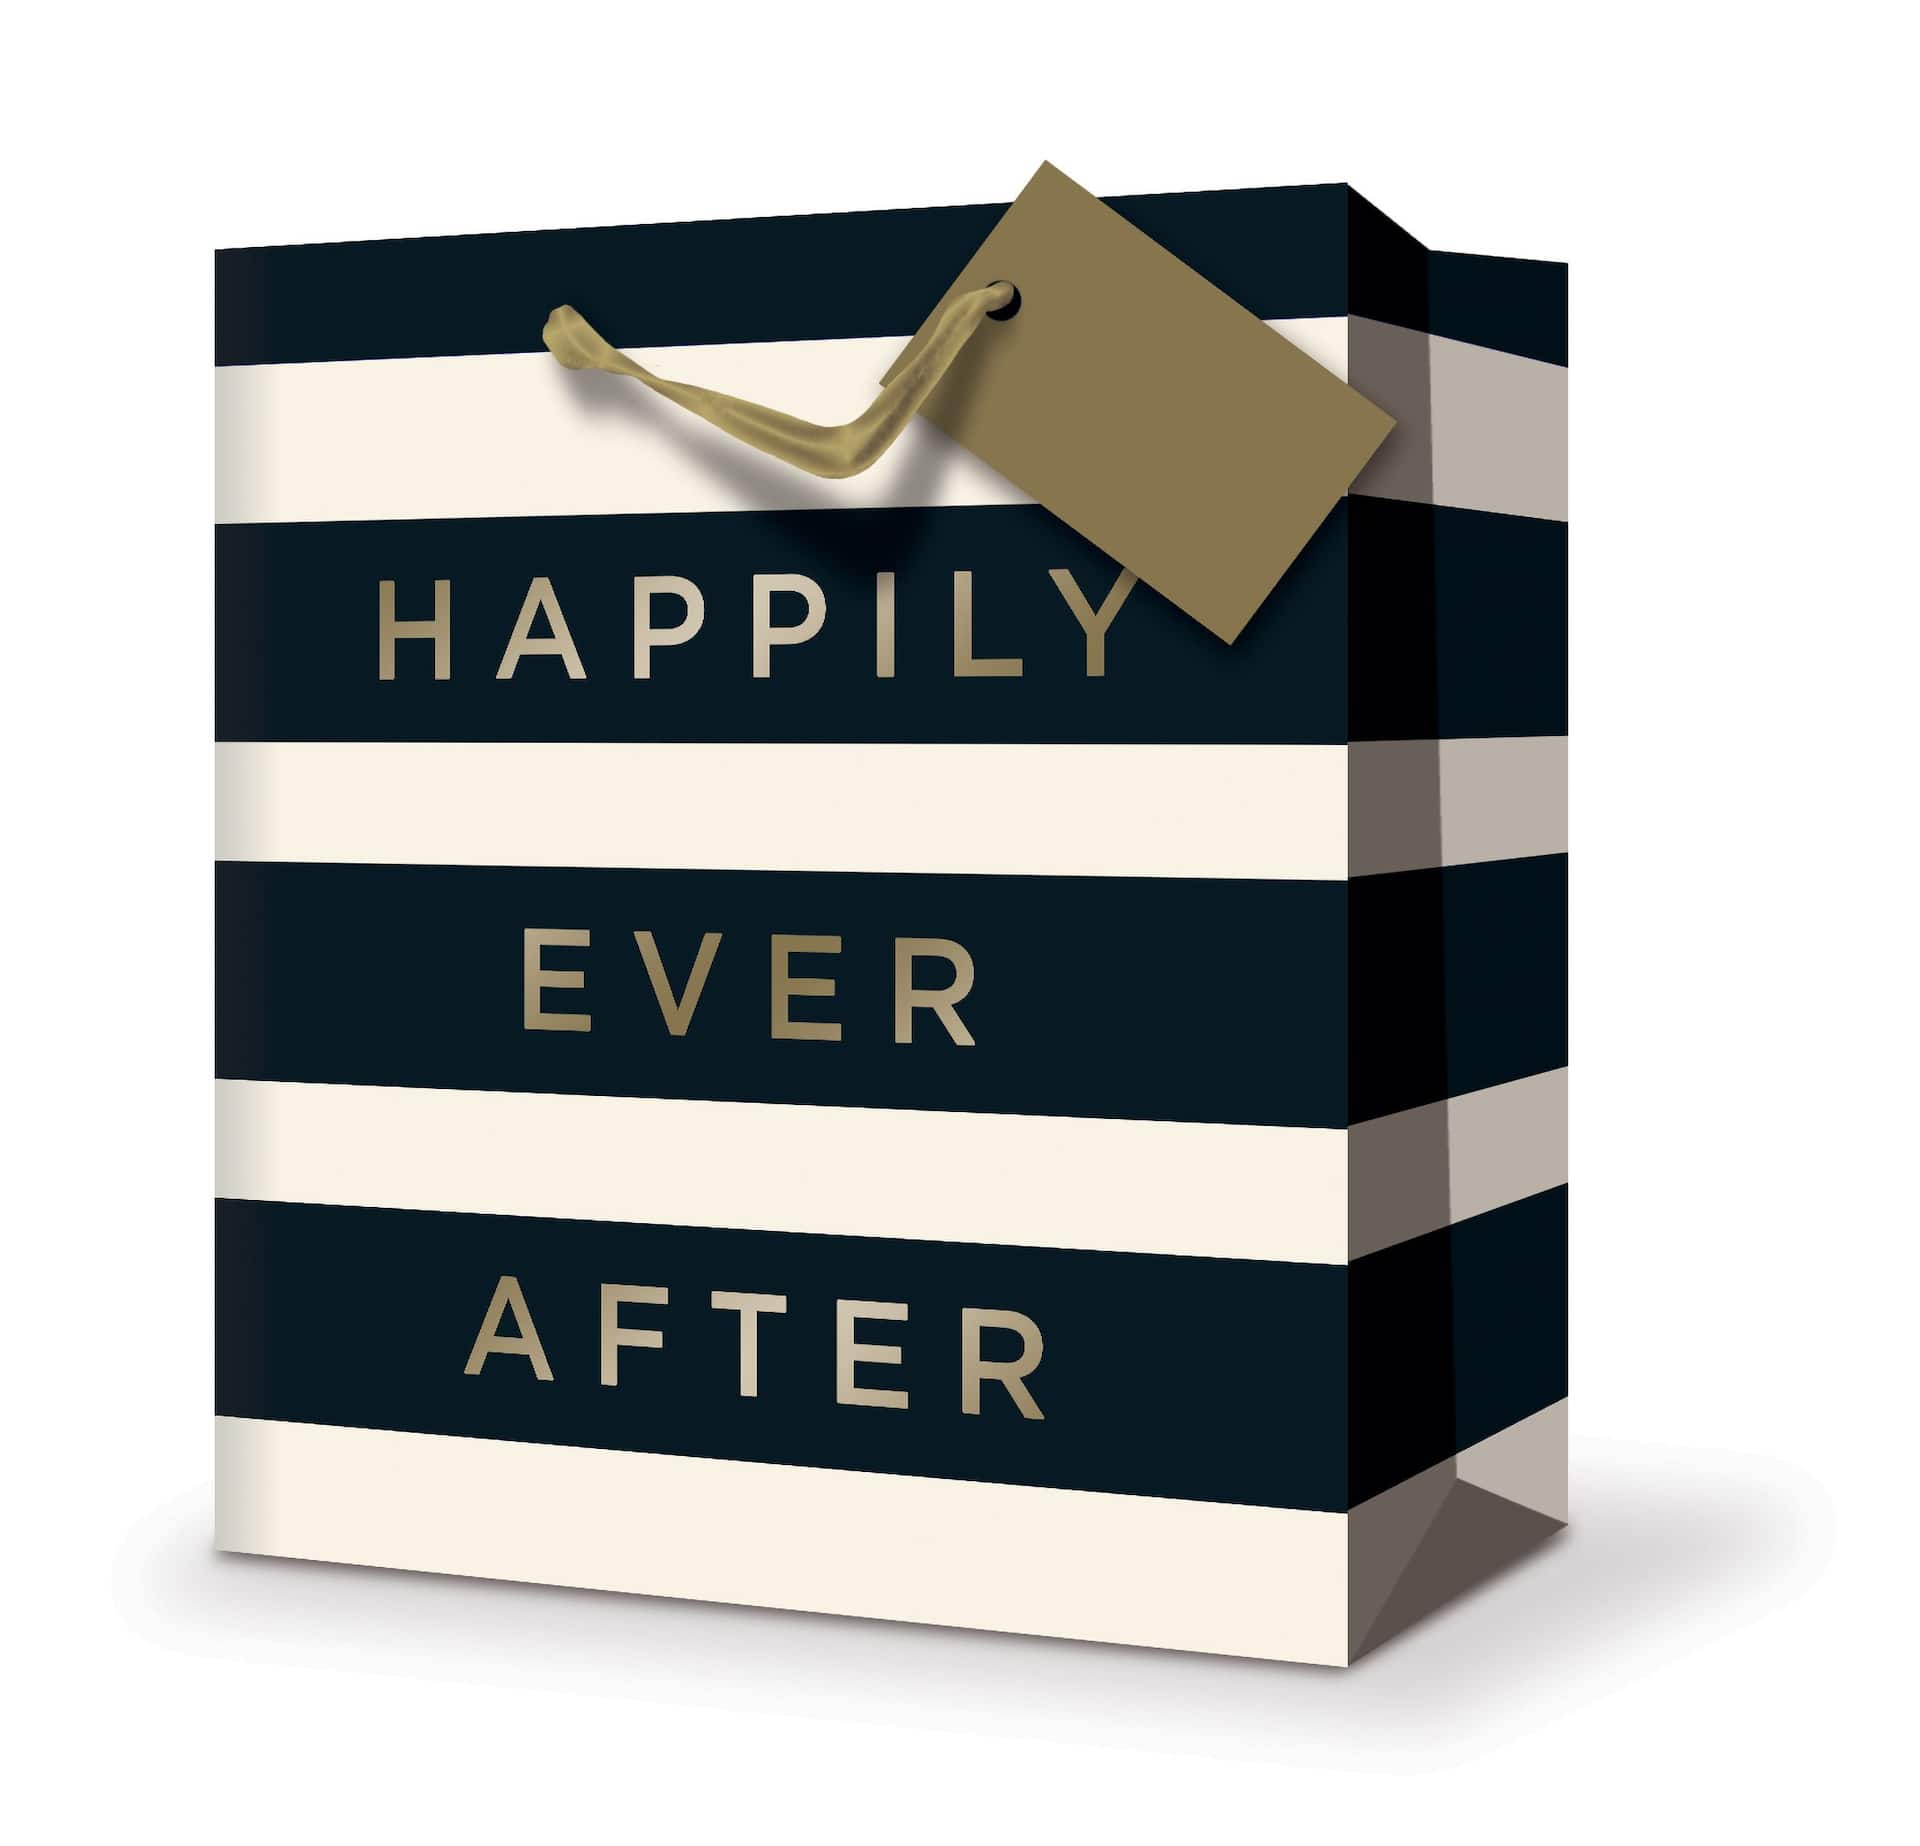 PPT - Alluring Wedding Gift Card Box Ideas For Your Wedding! PowerPoint  Presentation - ID:7686542